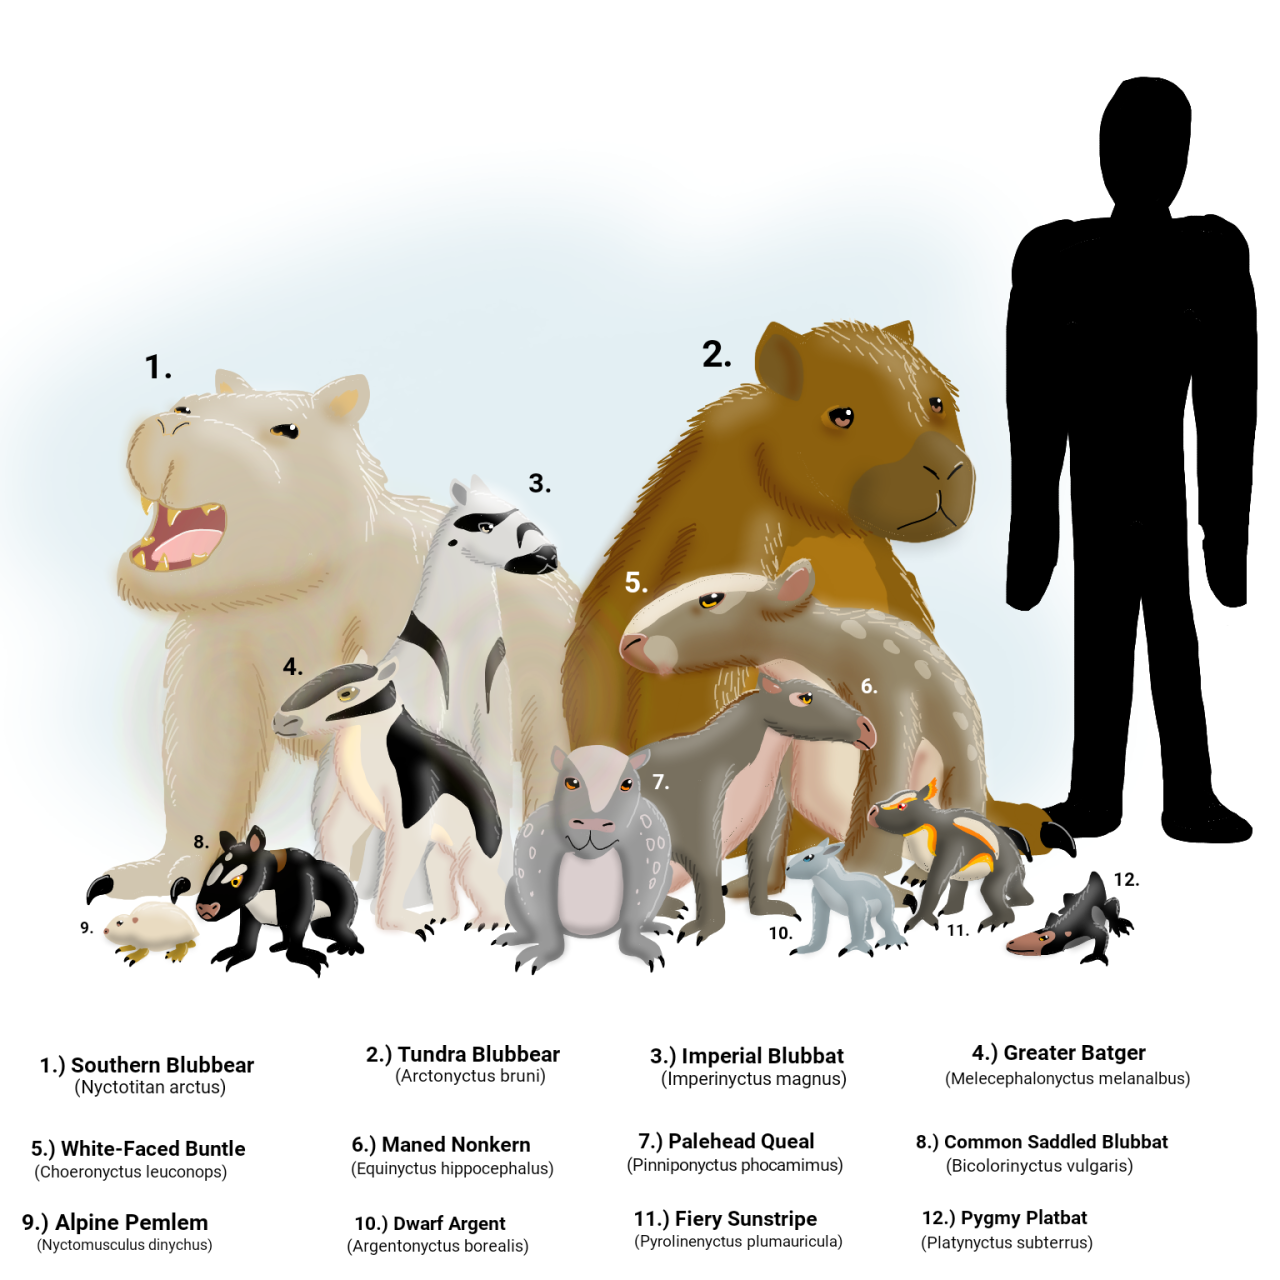 ceo of hamster evolution — The Early Temperocene: 135 million years